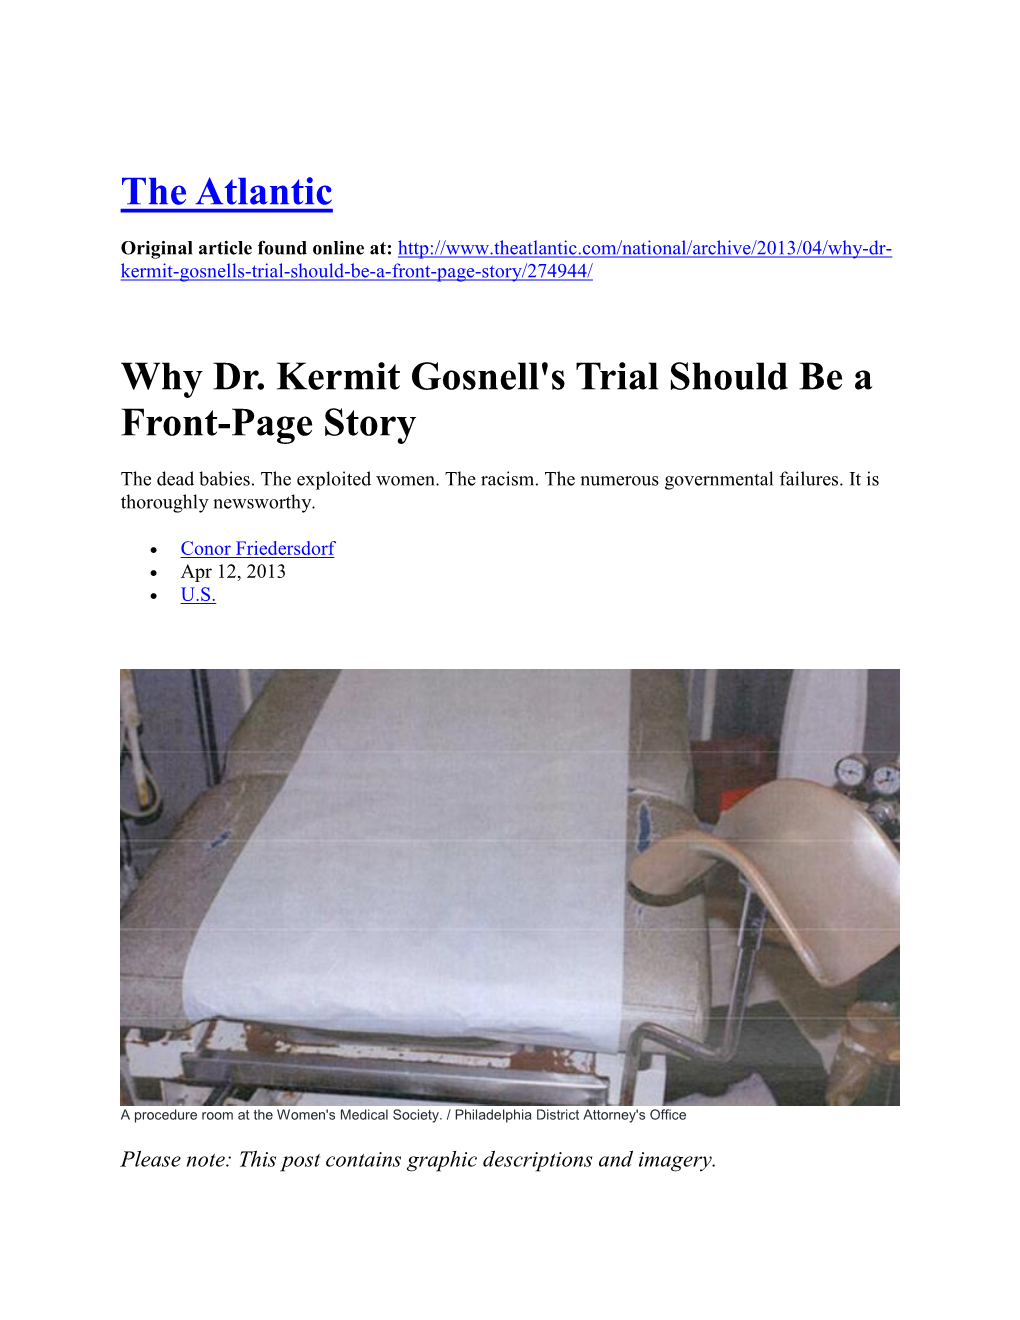 The Atlantic Why Dr. Kermit Gosnell's Trial Should Be a Front-Page Story